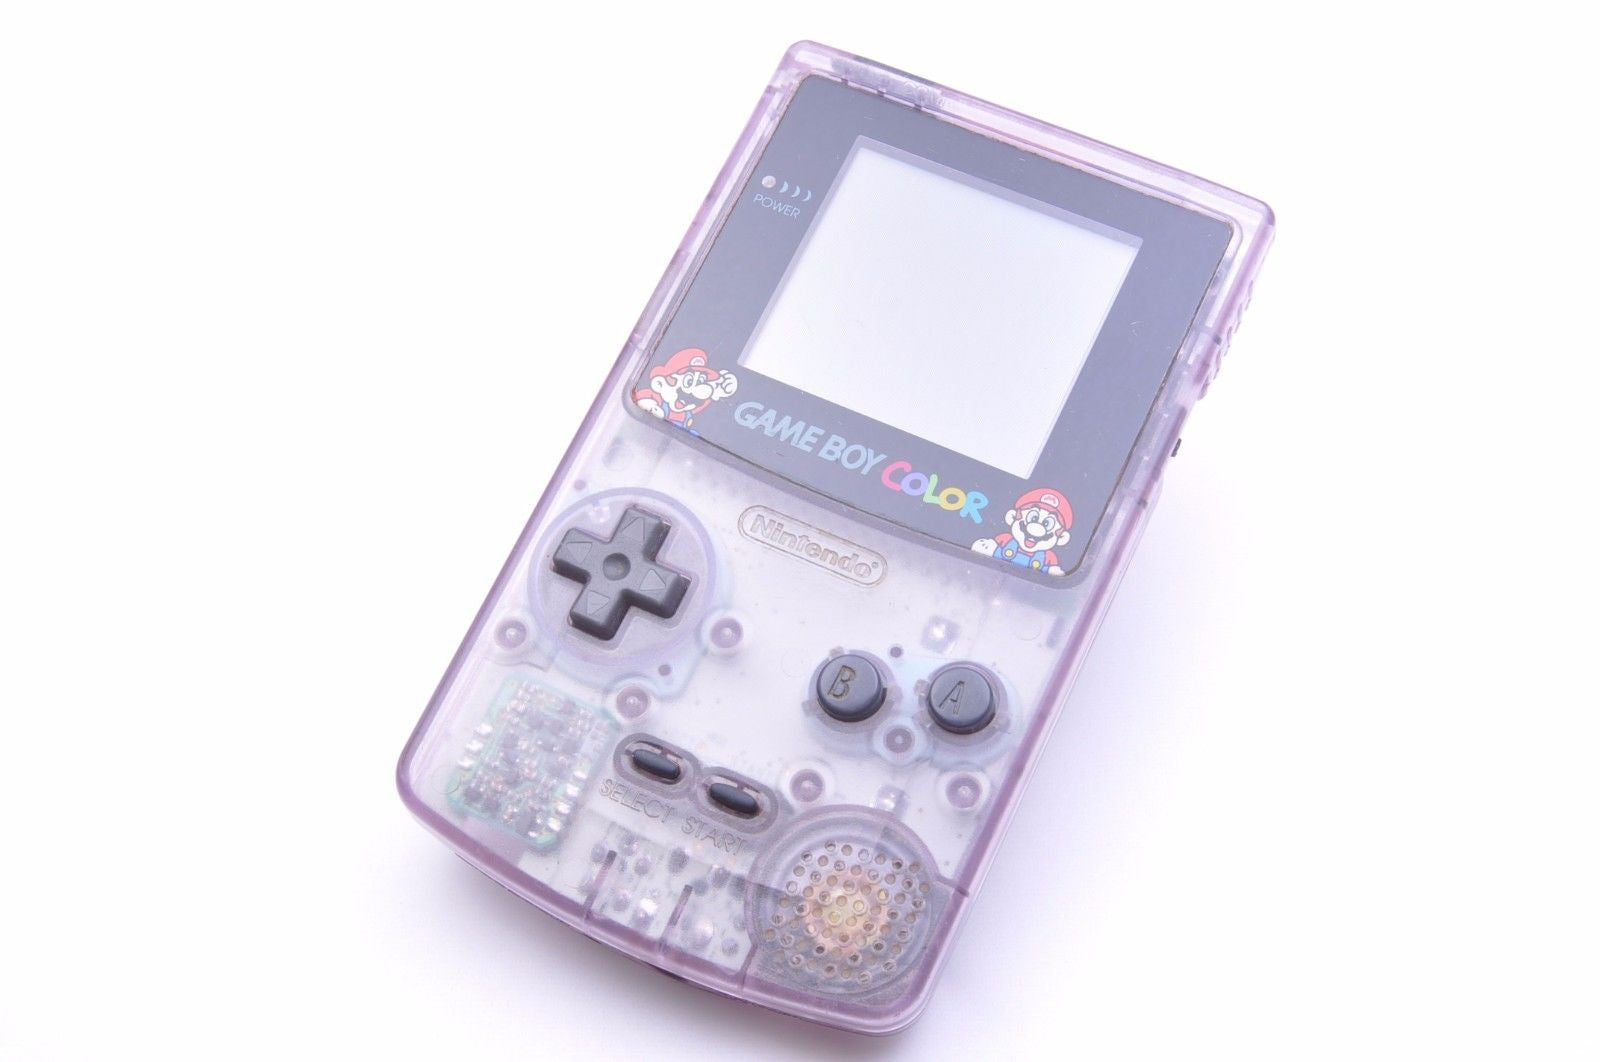 GAME BOY COLOR In Atomic Purple, Manual & Box, Case, Rechargeable